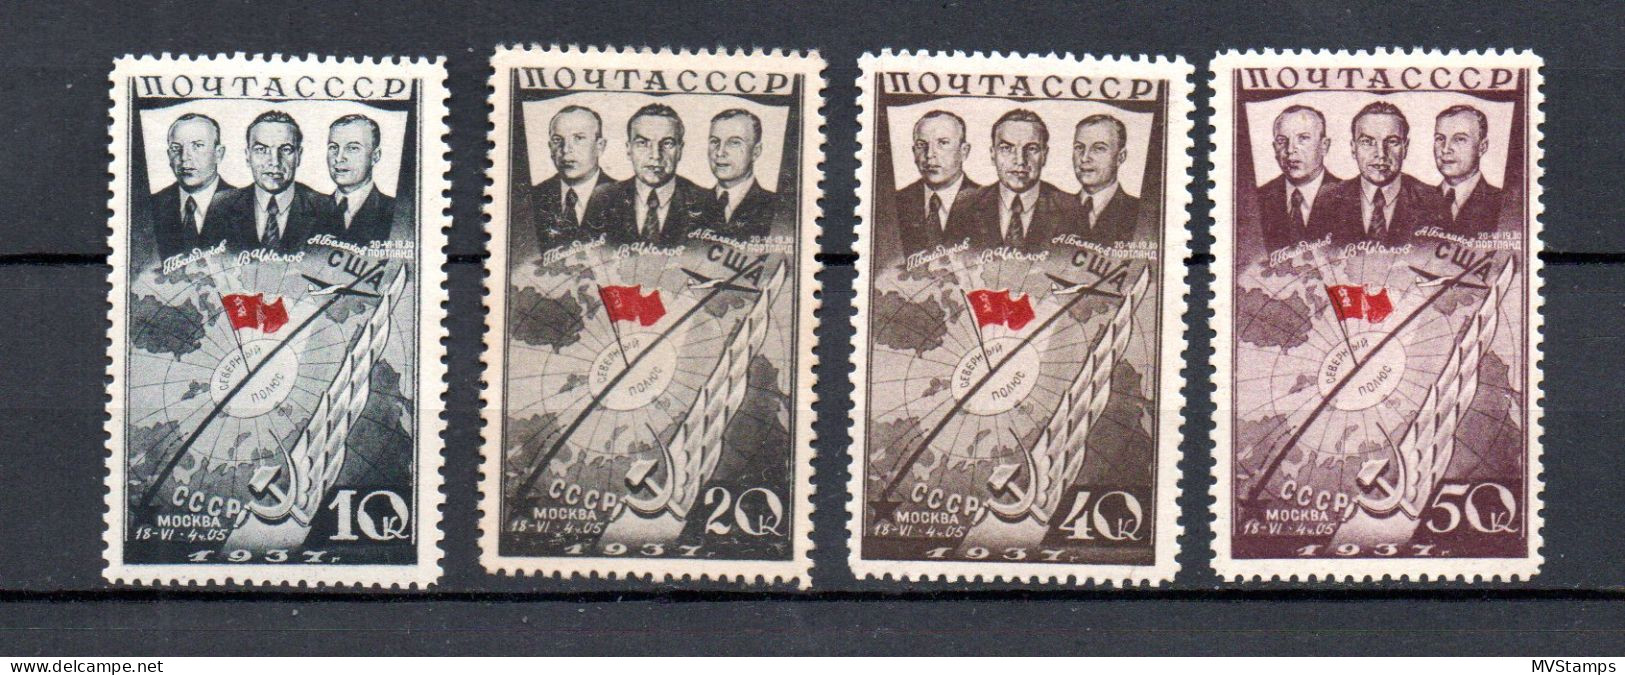 Russia 1938 Old Set Polar-Flight Moscow-Portland Stamps (Michel 595/98) Nice MLH - Neufs